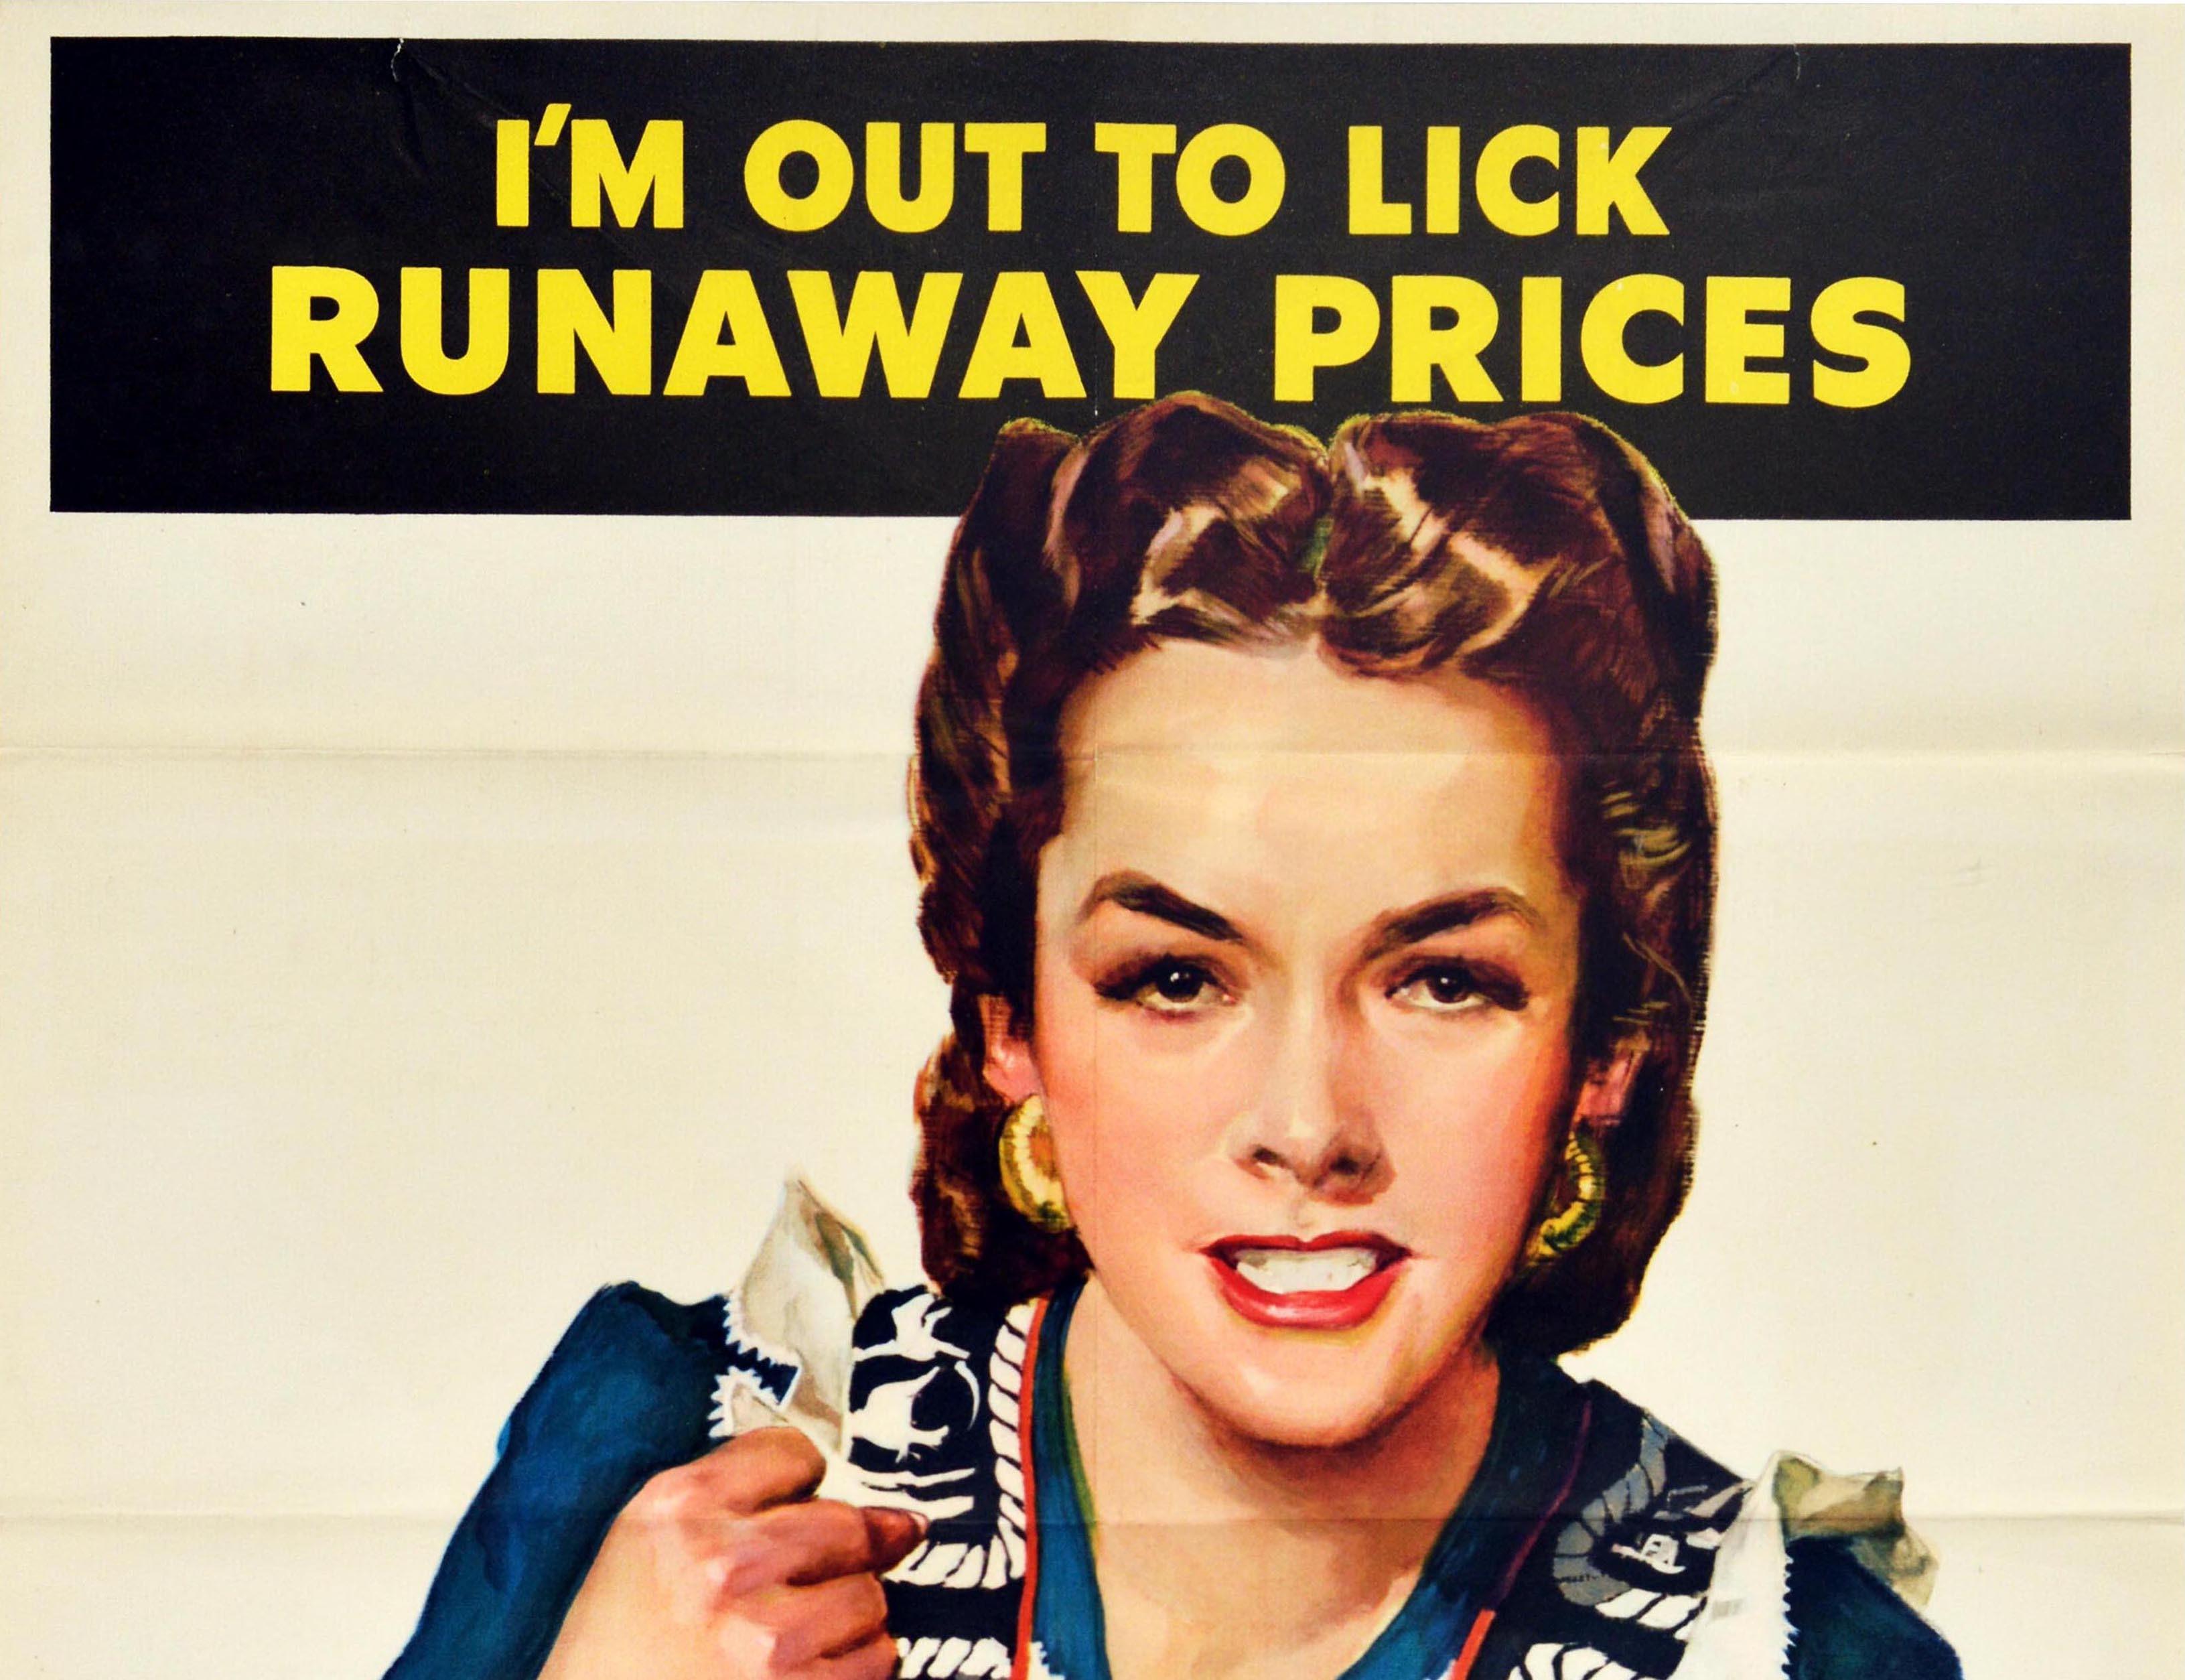 Original Vintage WWII Poster Runaway Prices Economy Rationing War Bonds Victory - Print by Unknown